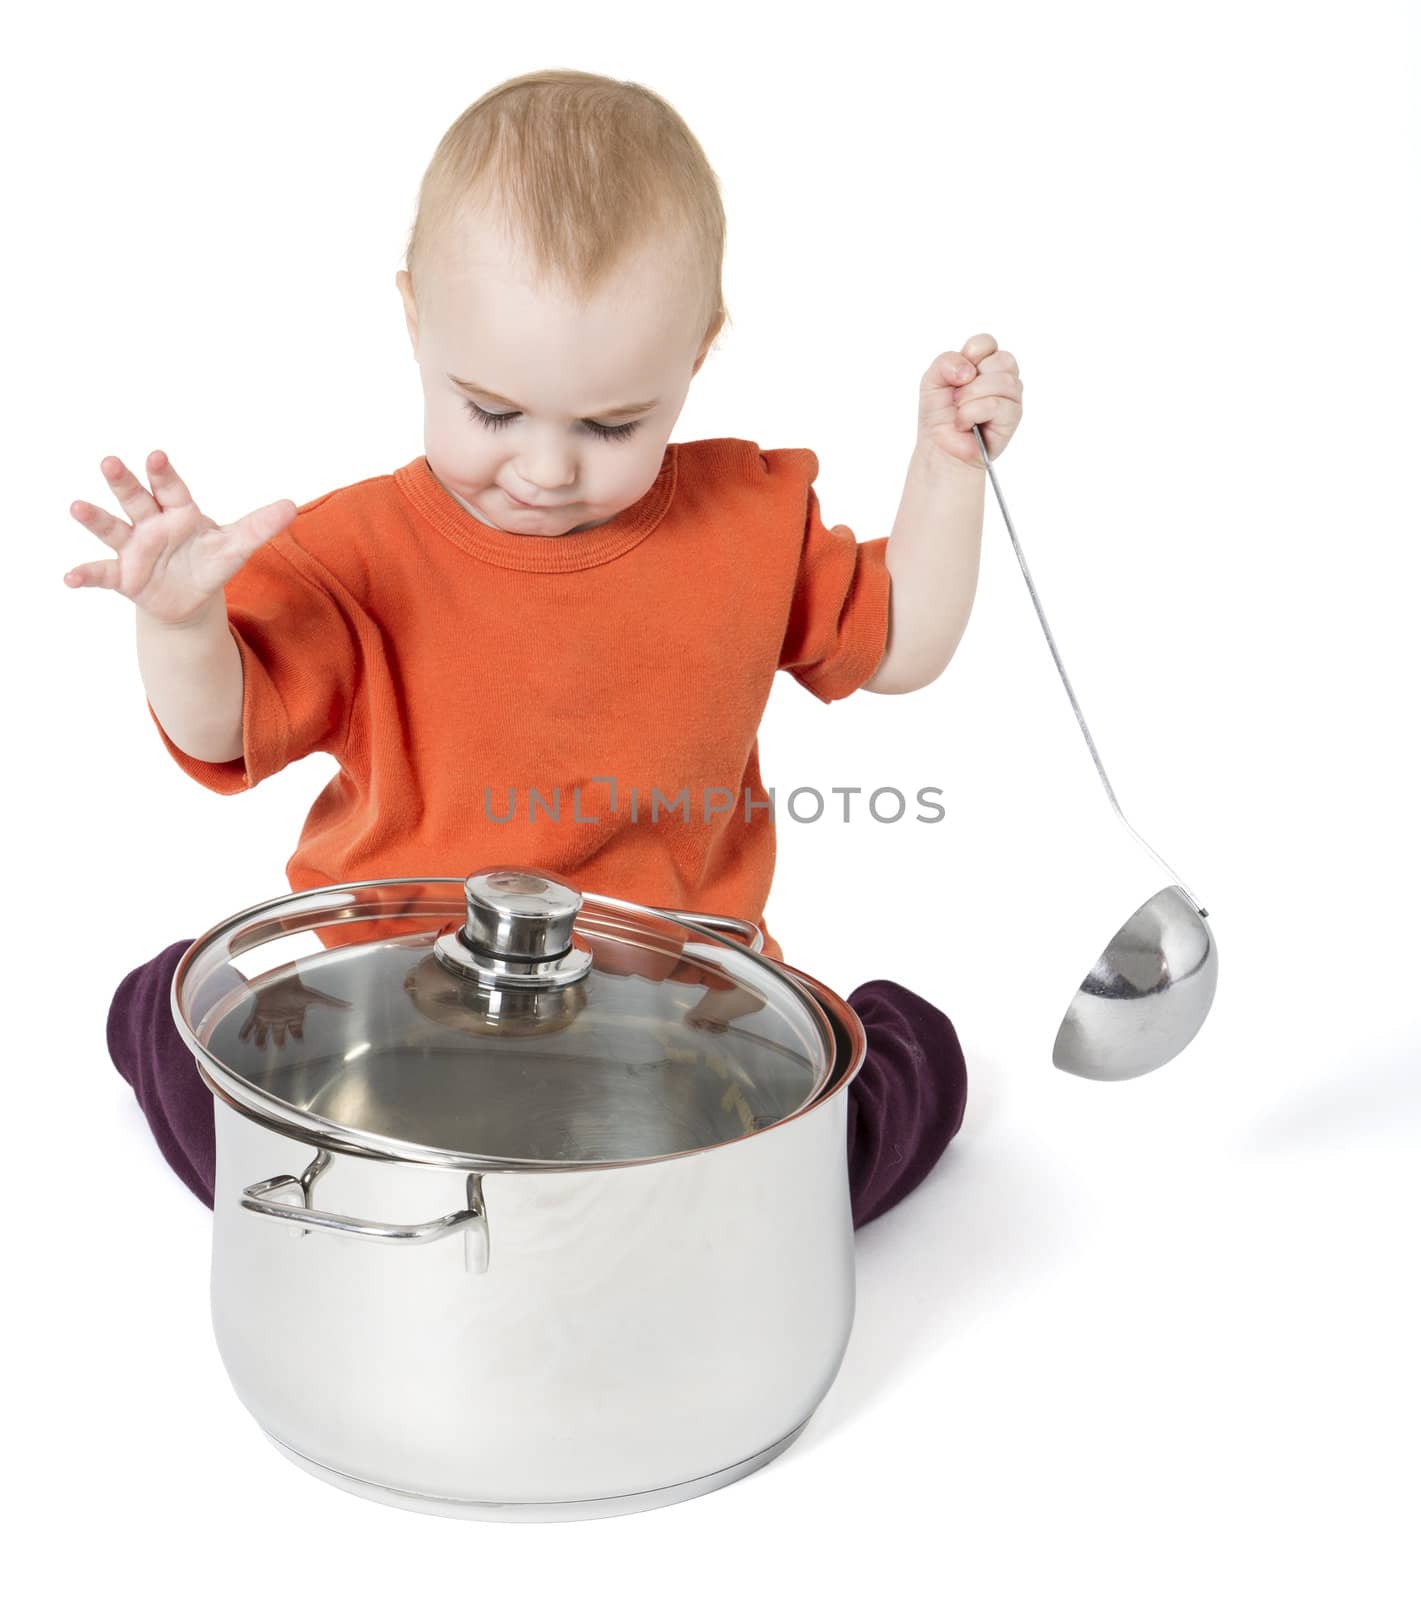 baby with big cooking pot isolated on white background